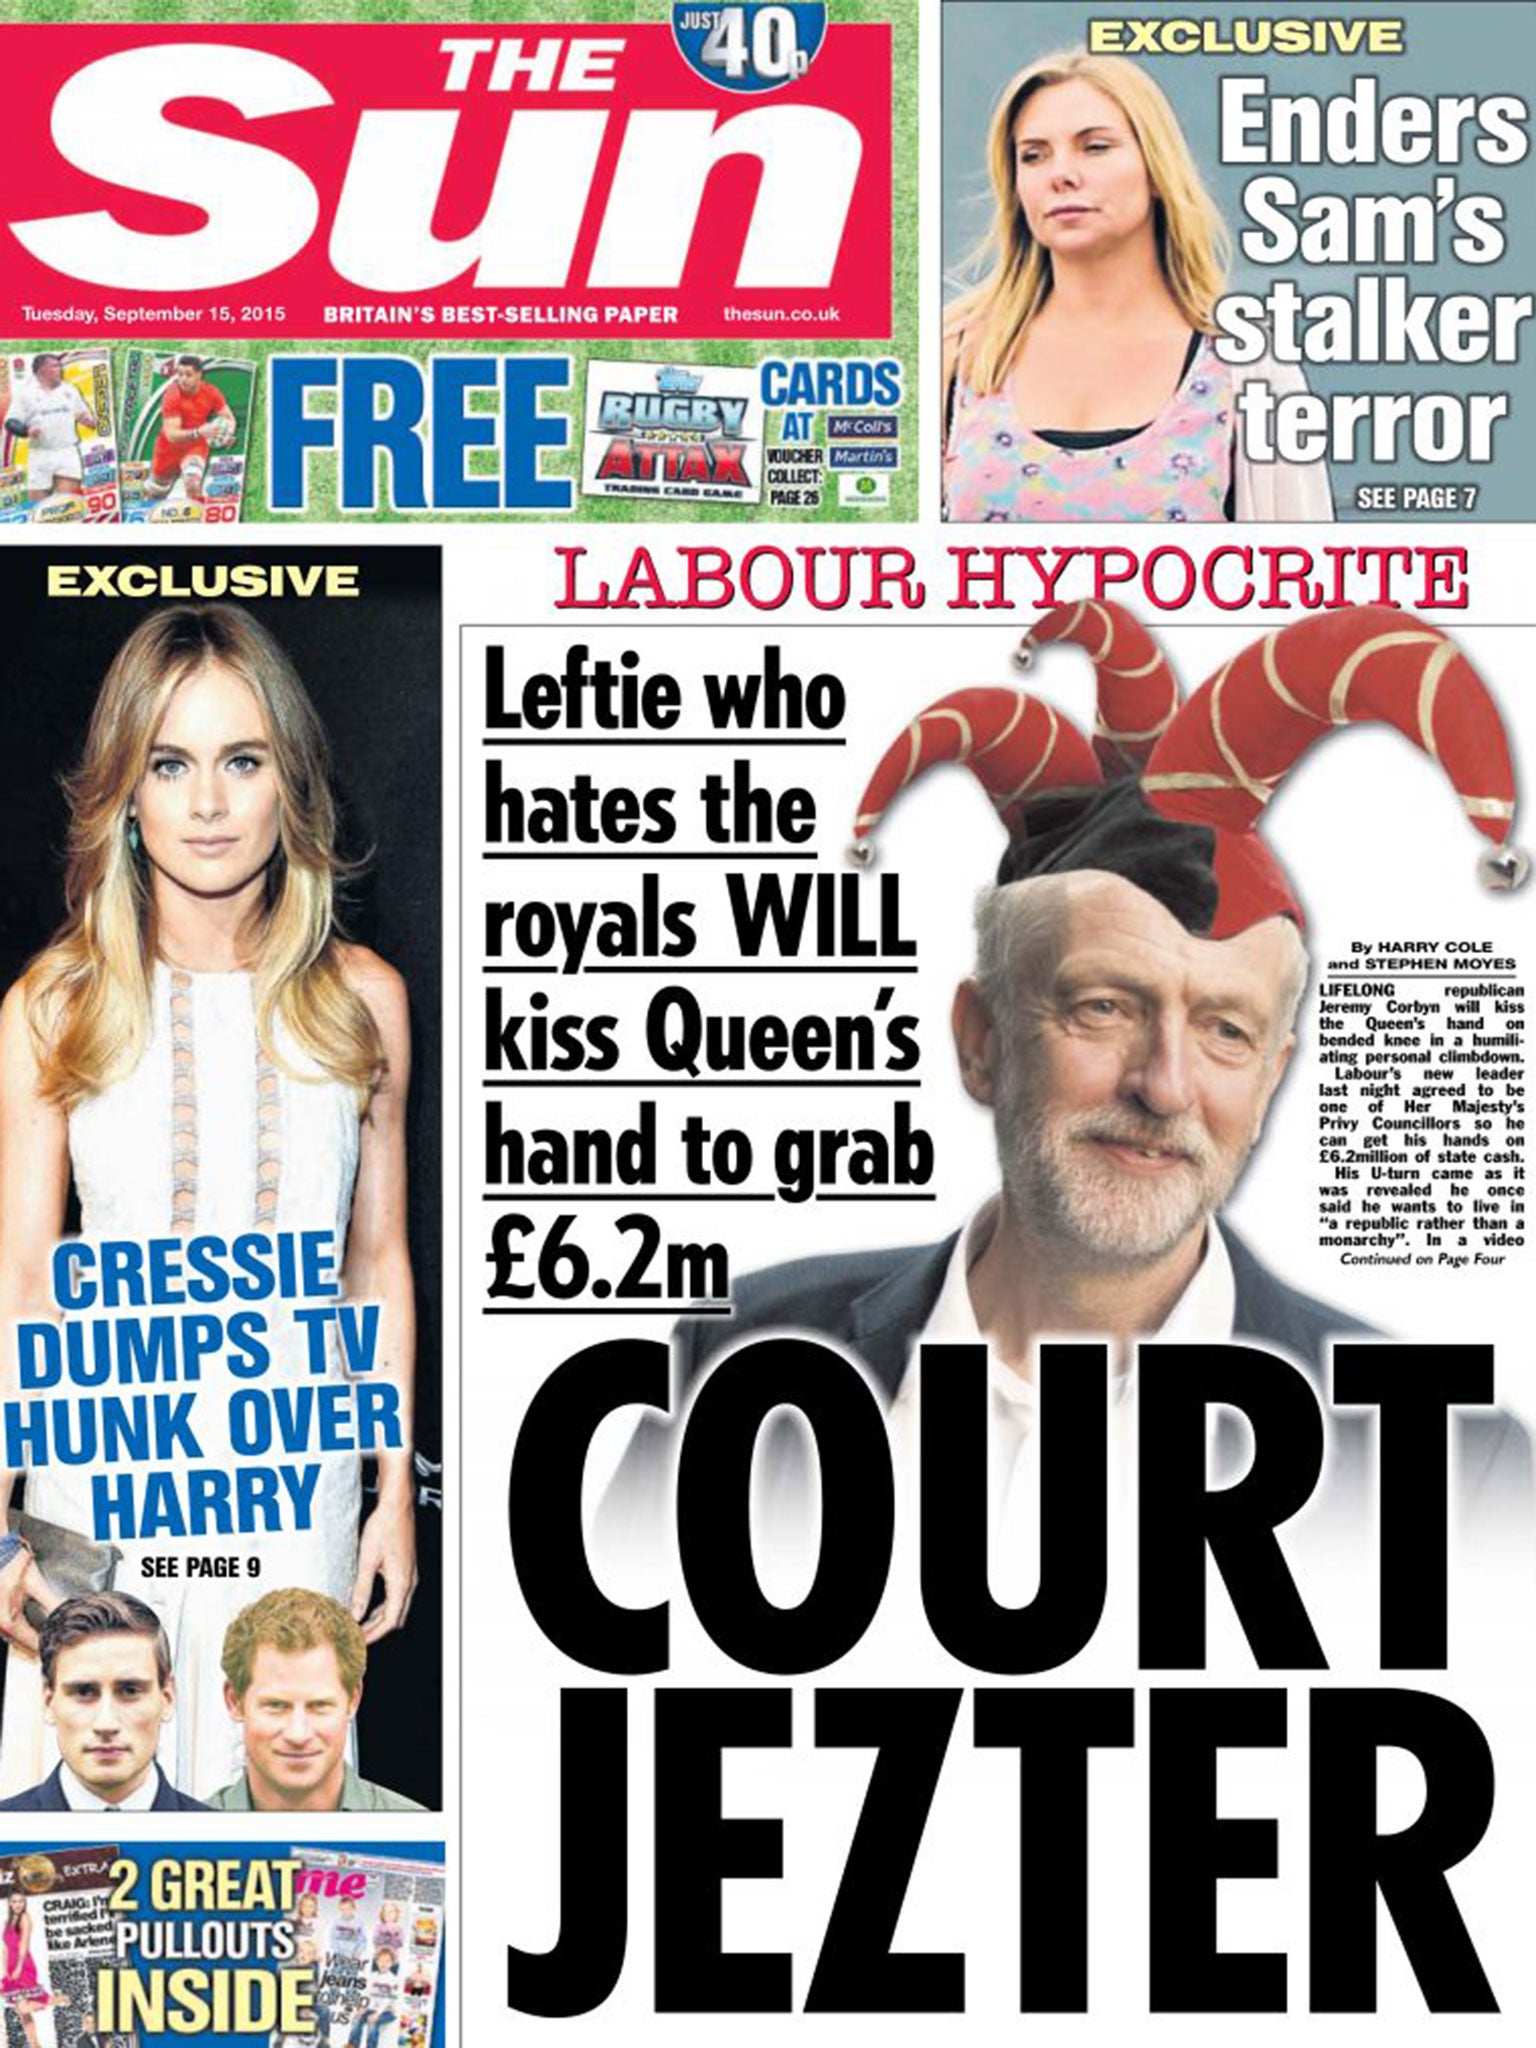 The Sun’s front page attacking Labour’s leader Jeremy Corbyn